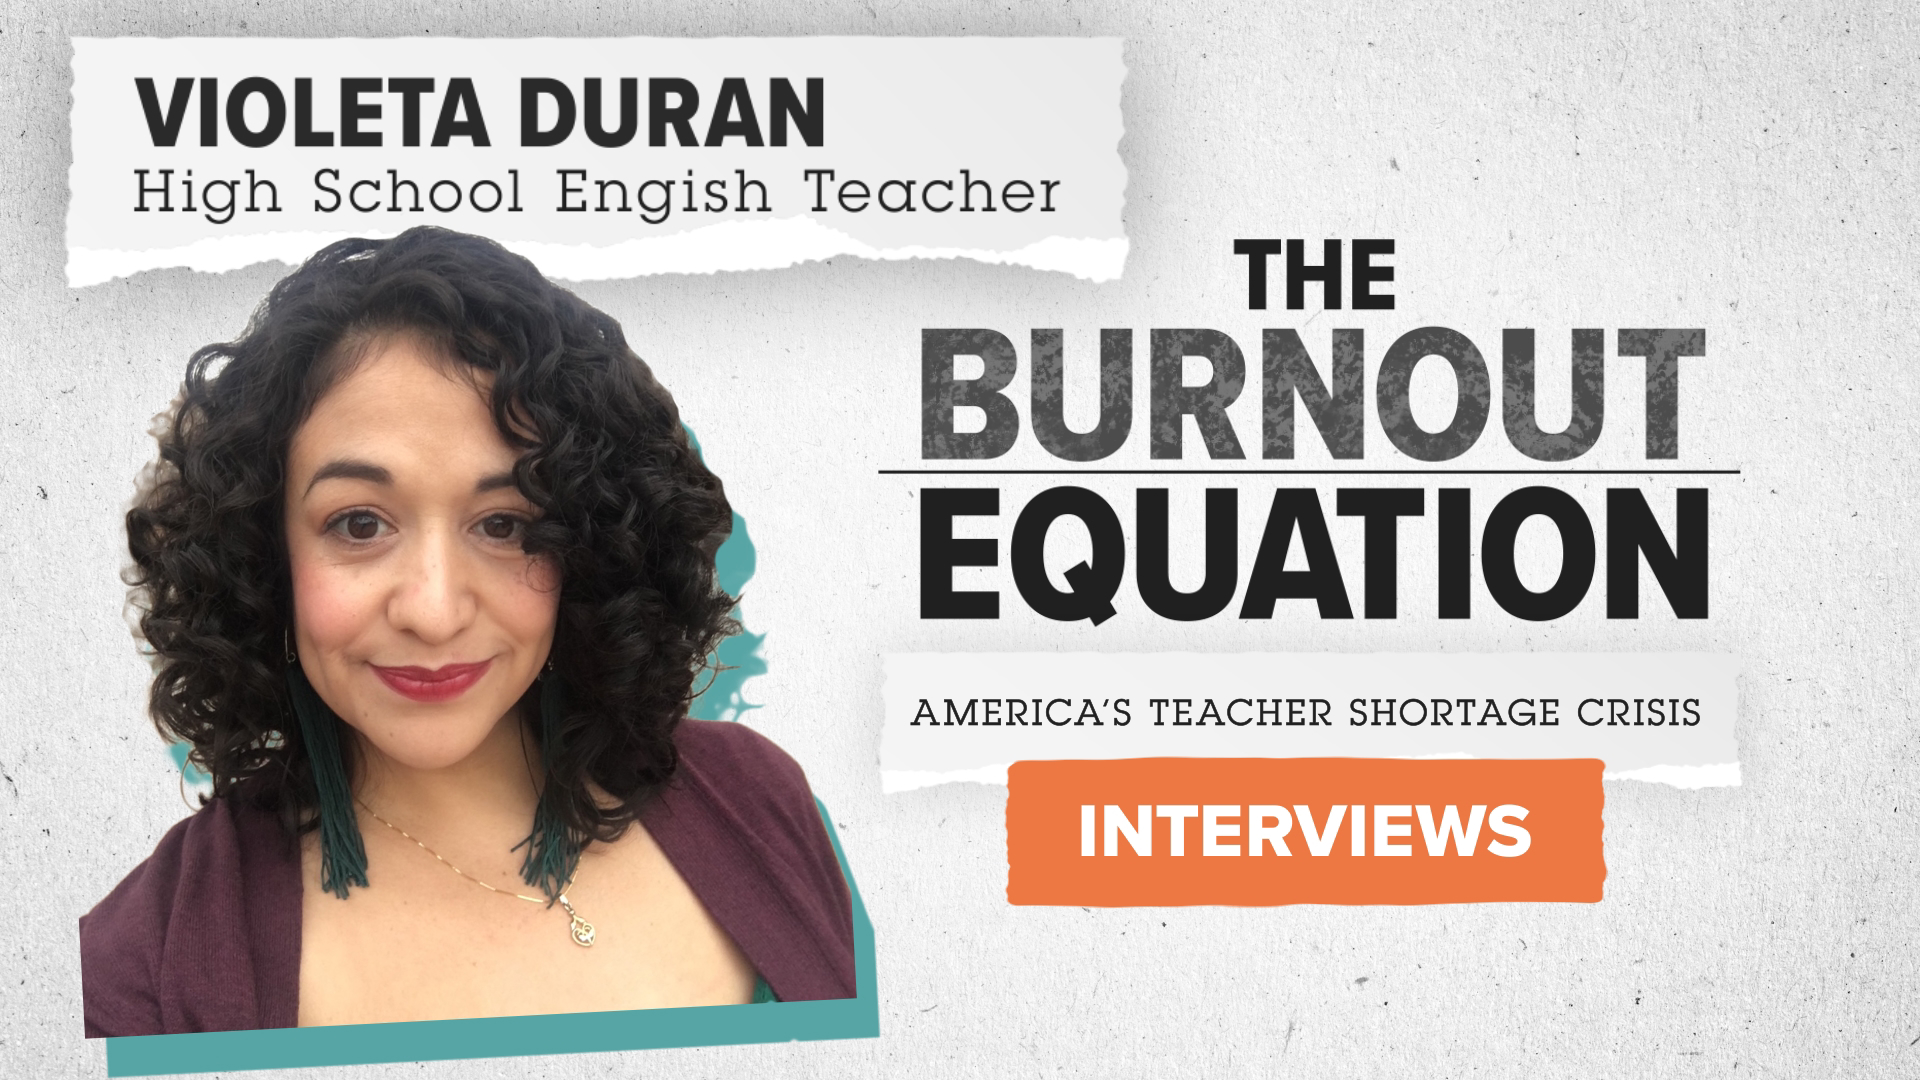 High school English teacher Violeta Duran is burned out, and she's not alone.